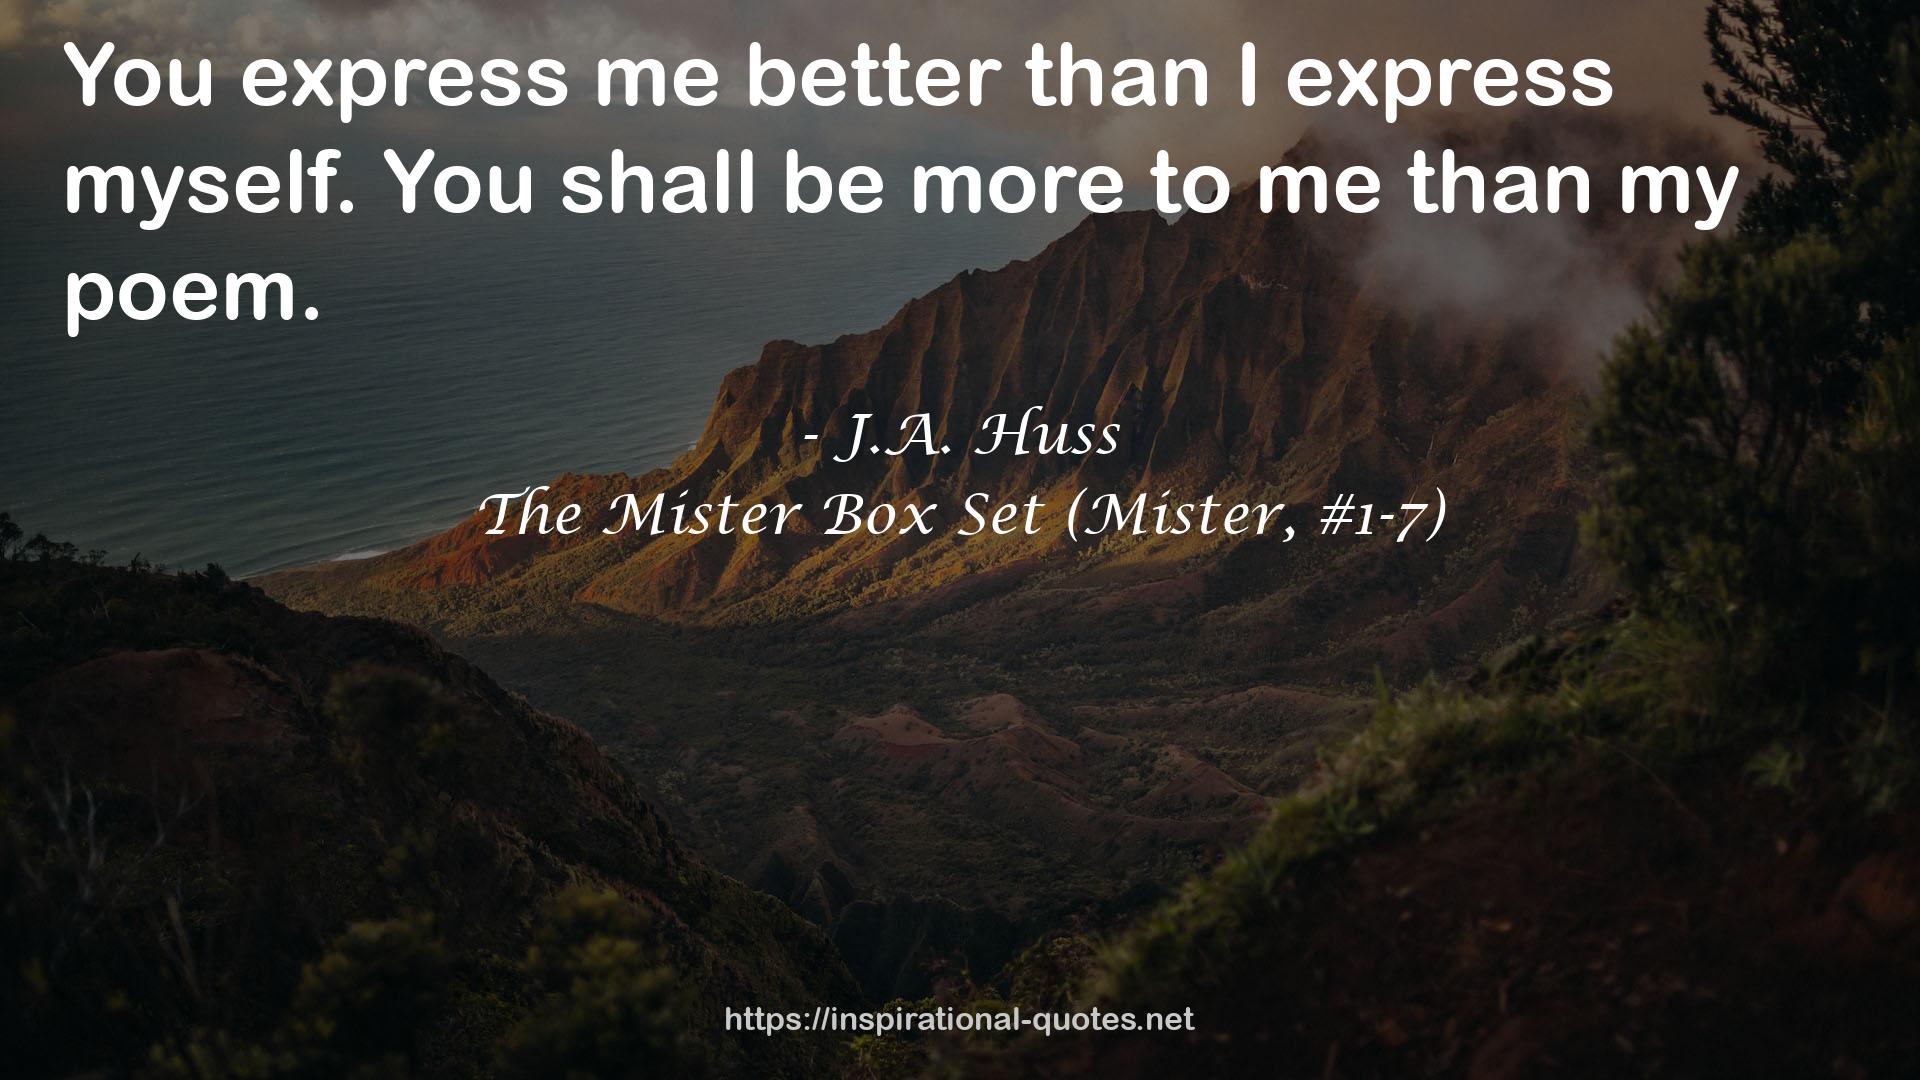 The Mister Box Set (Mister, #1-7) QUOTES